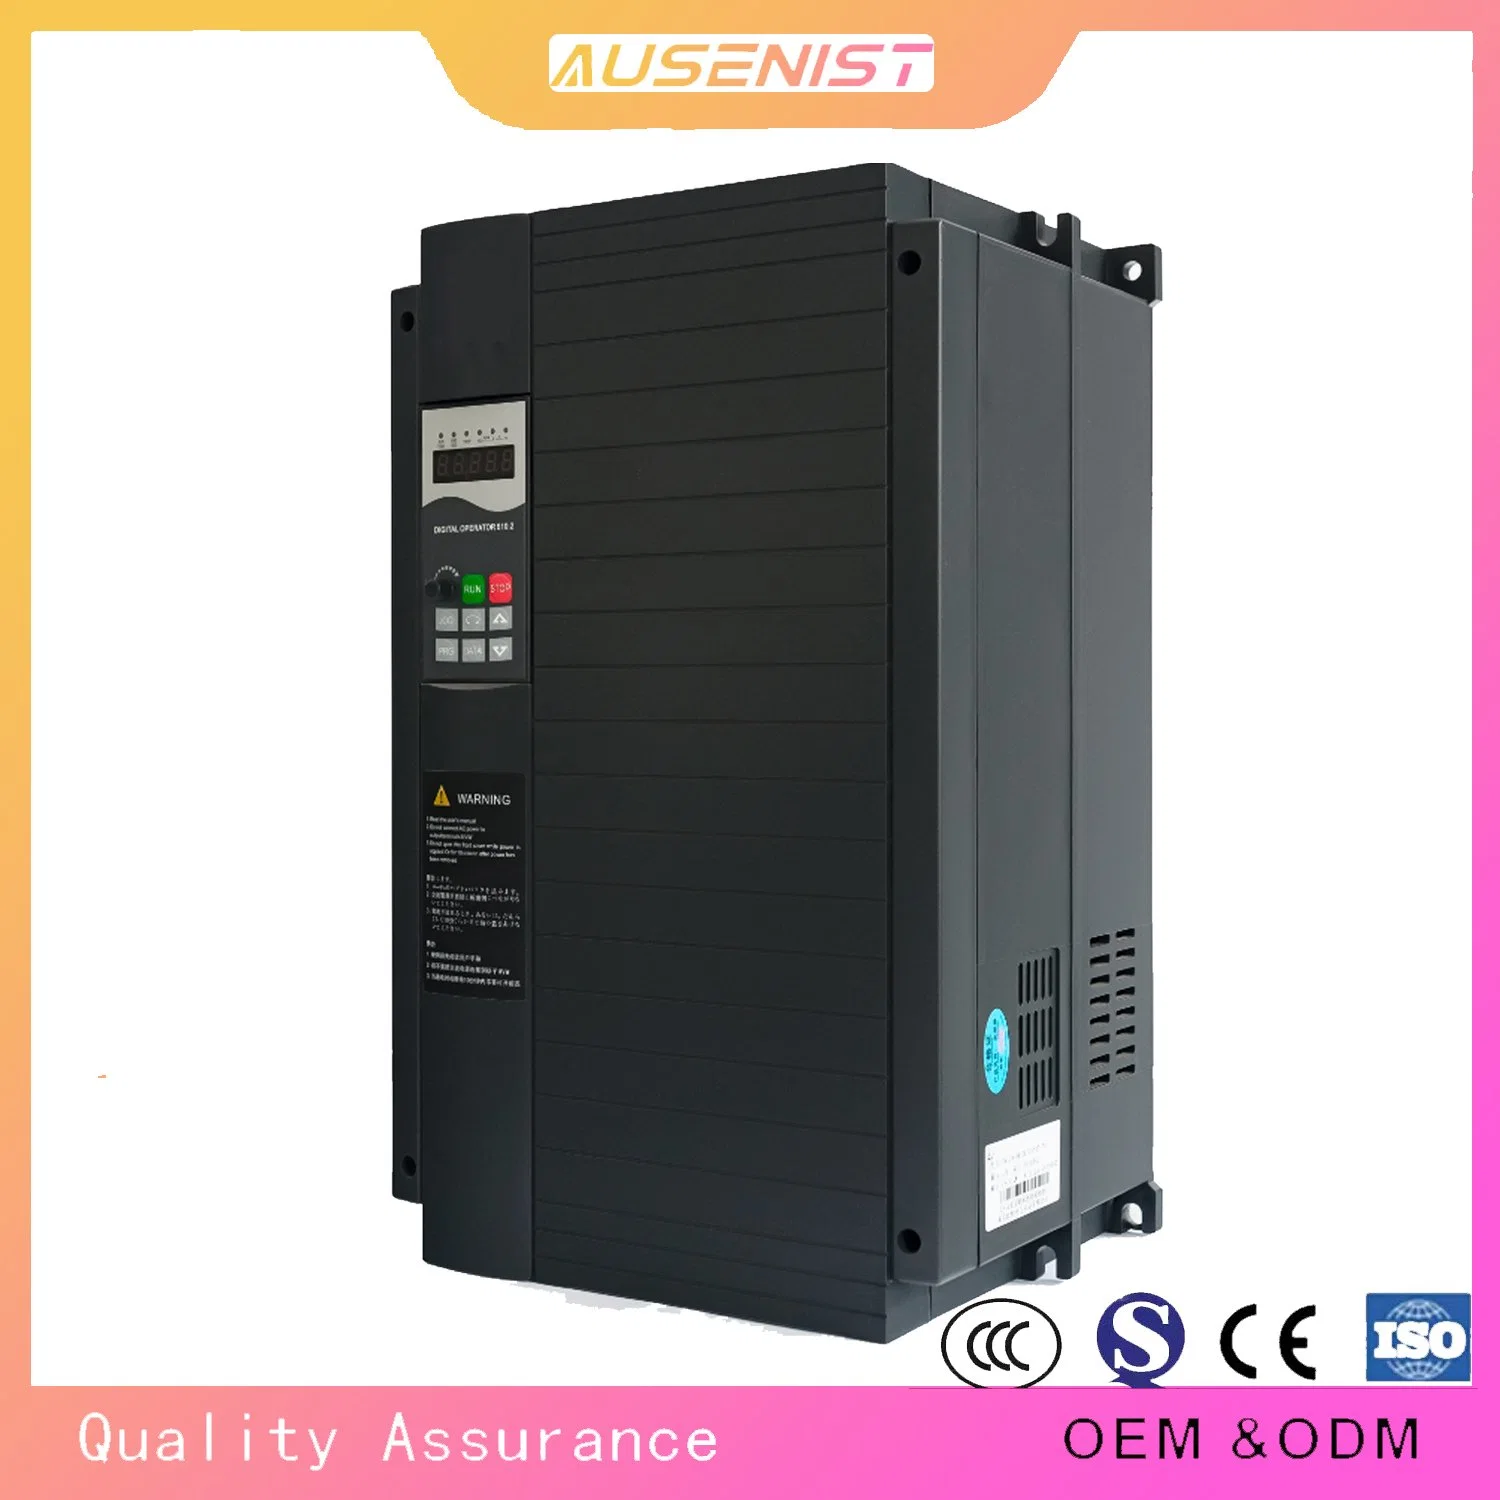 Ausenist 11kw Water Pump VFD Price Drive 2HP 0.75kw for Motor 37kw 50HP Variable Frequency Converter Drives Prices 220V